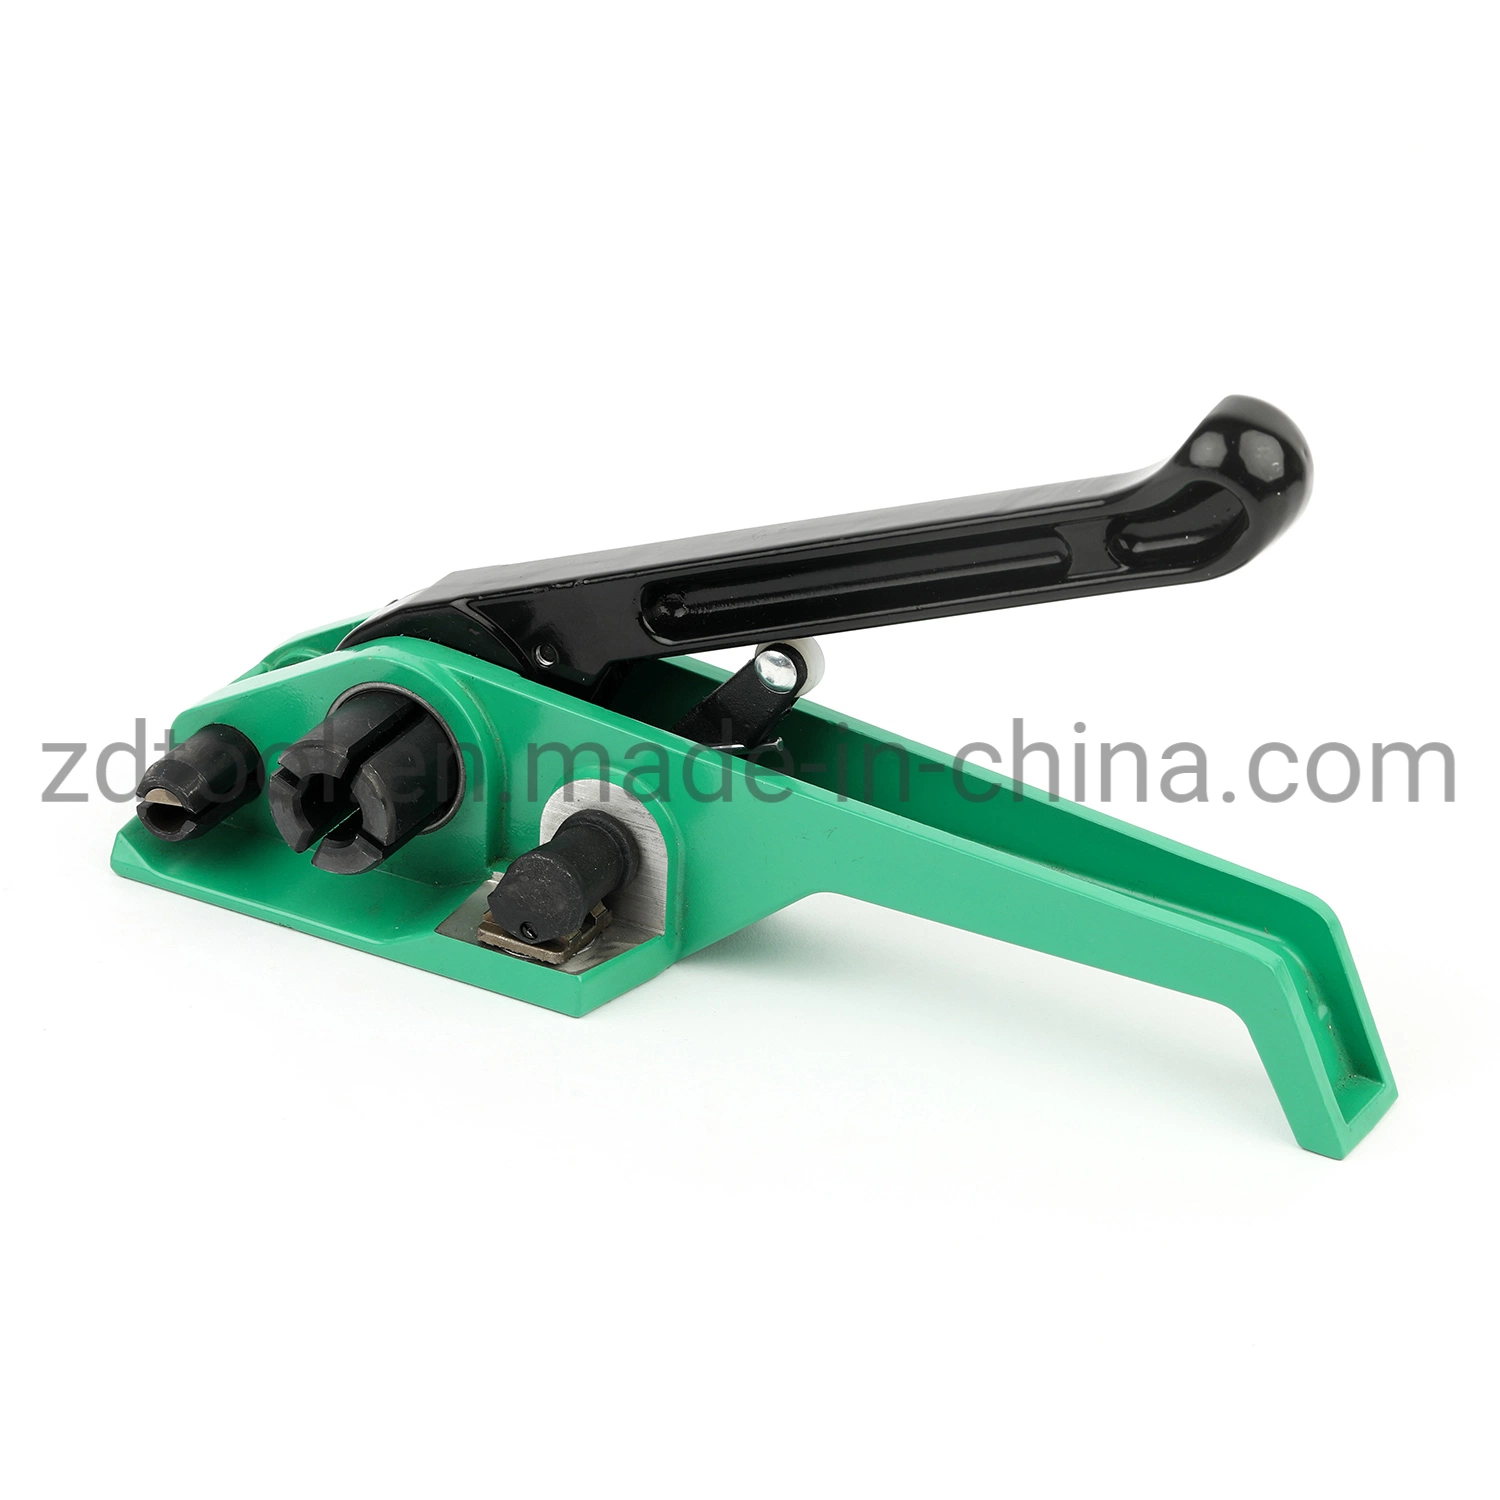 Strap Banding Tool for Wooden Box, Paper Carton, Wood, Stone and Other Materials Packing (B315)